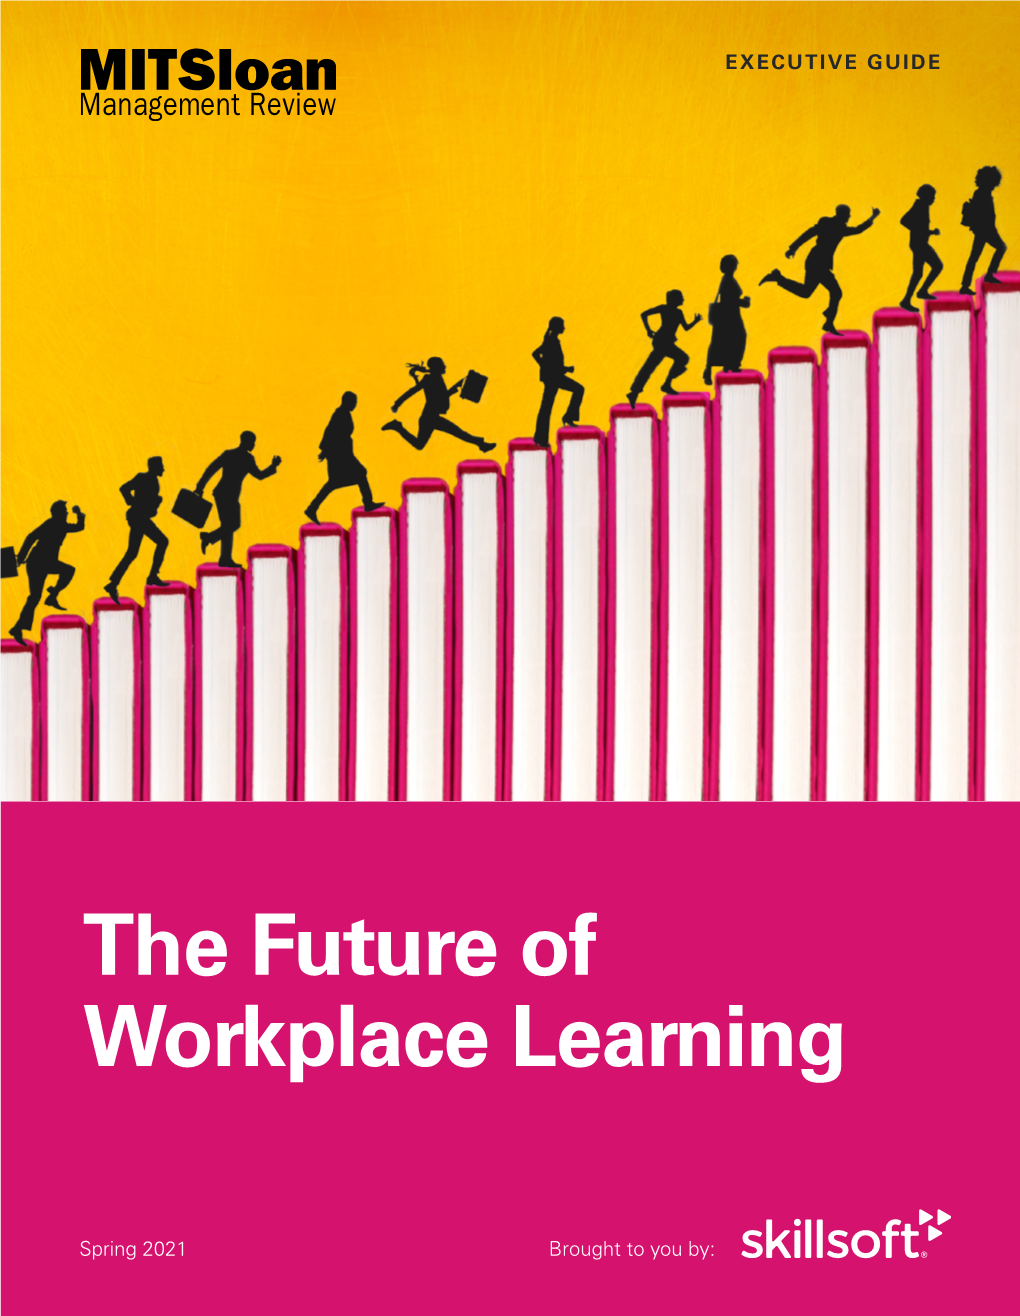 The Future of Workplace Learning